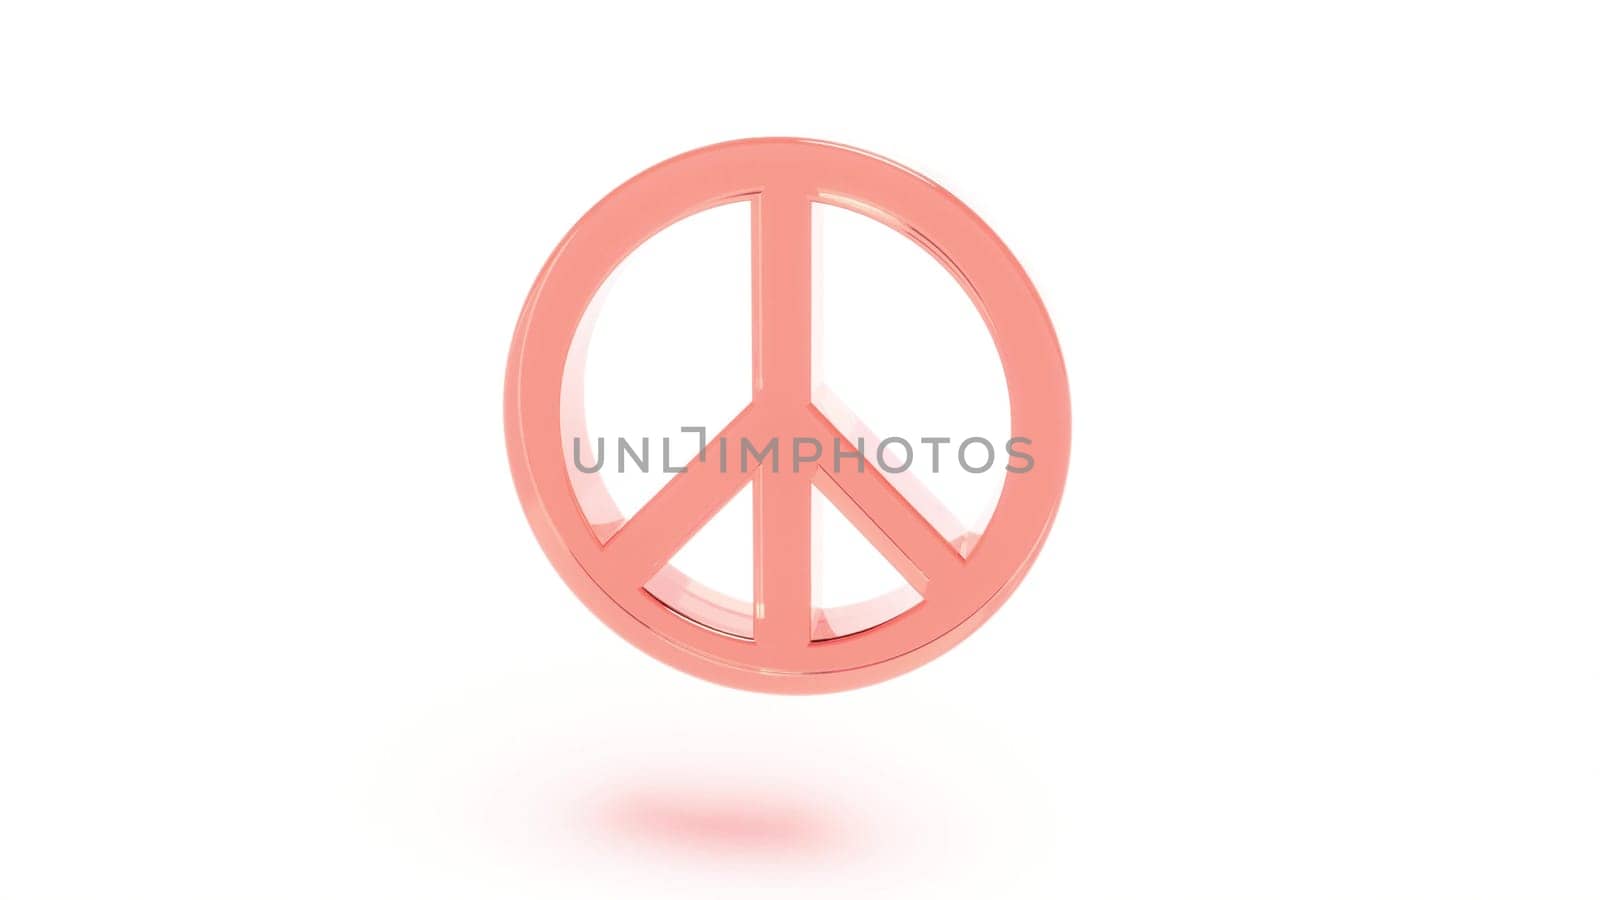 Sign peace change the colors intro 3d render by Zozulinskyi